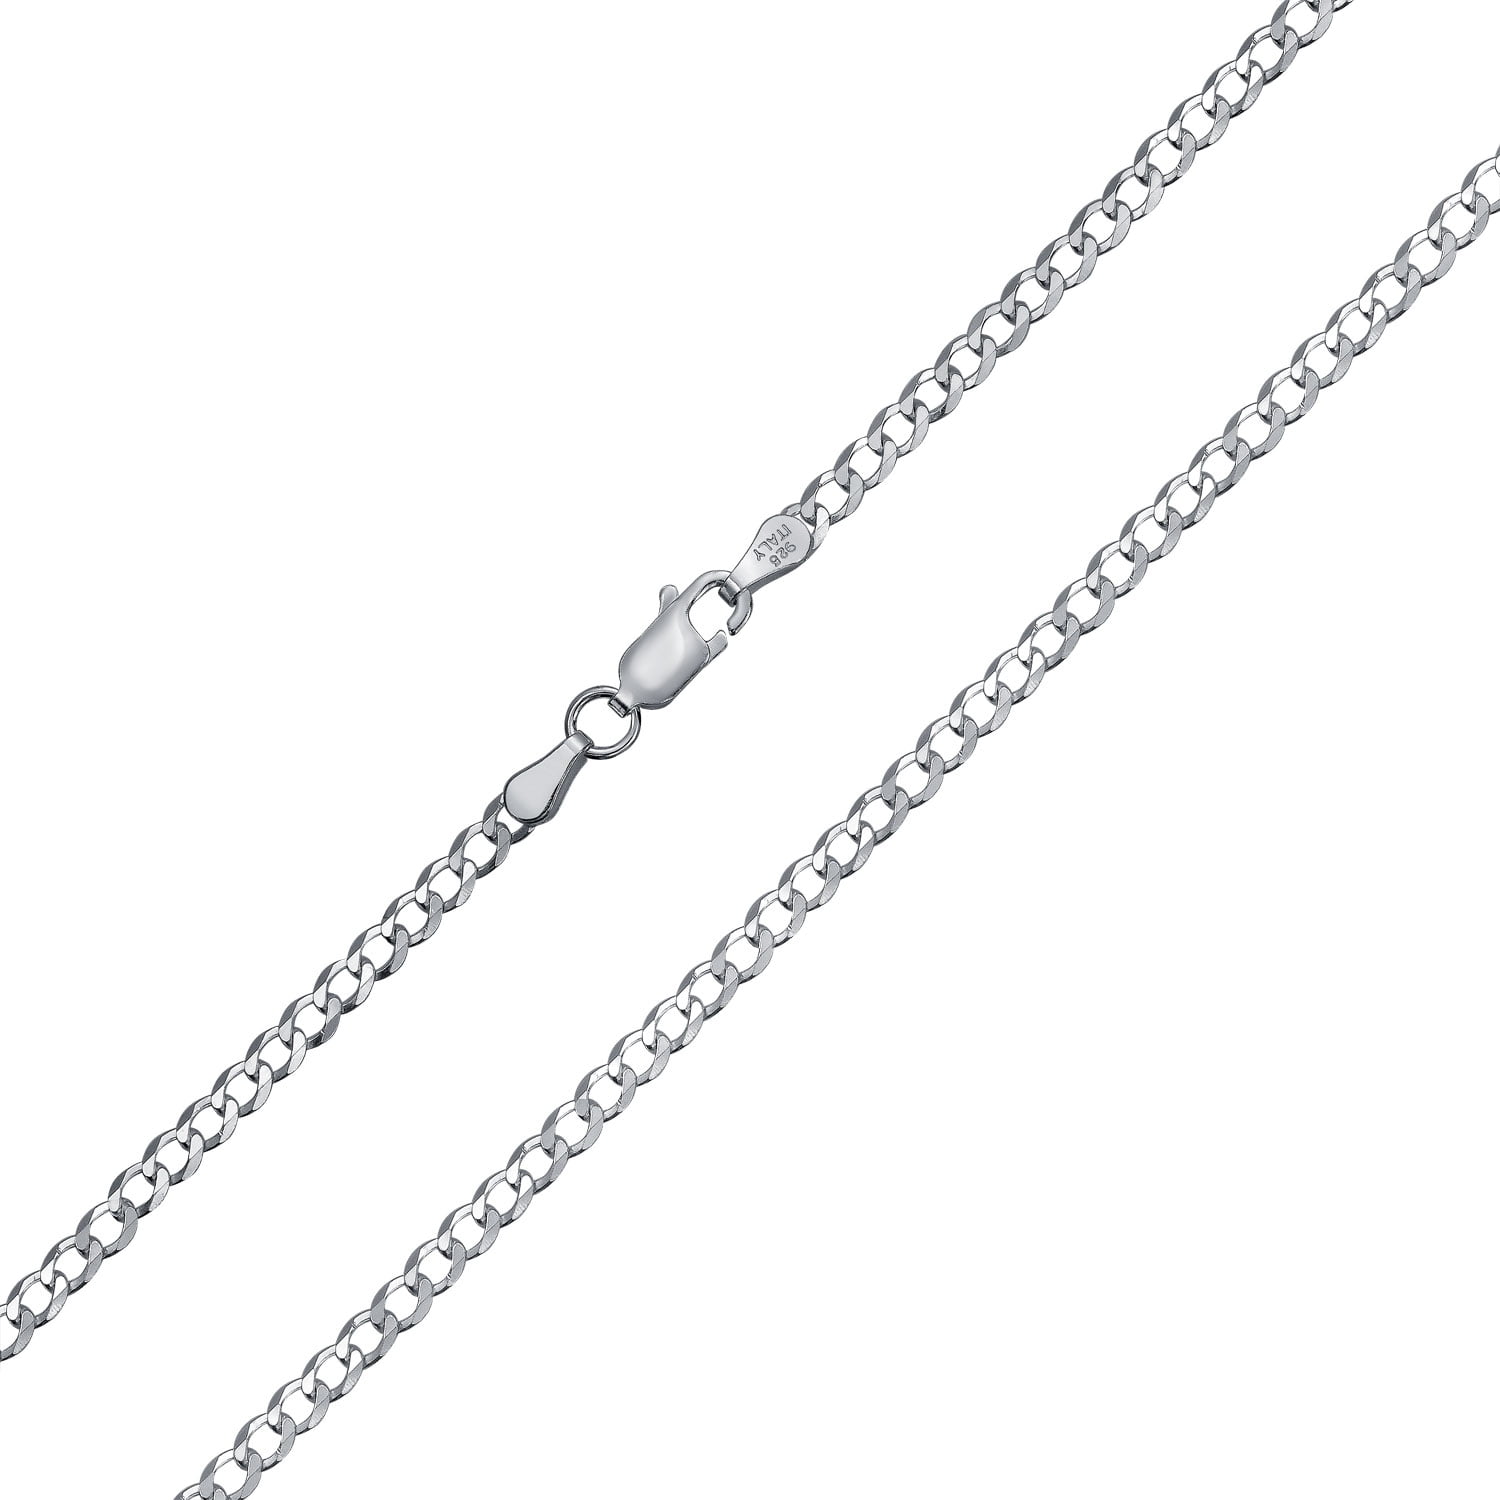 GENUINE SOLID 925 STERLING SILVER CURB CHAIN NECKLACE ALL INCH SIZES MEN WOMEN